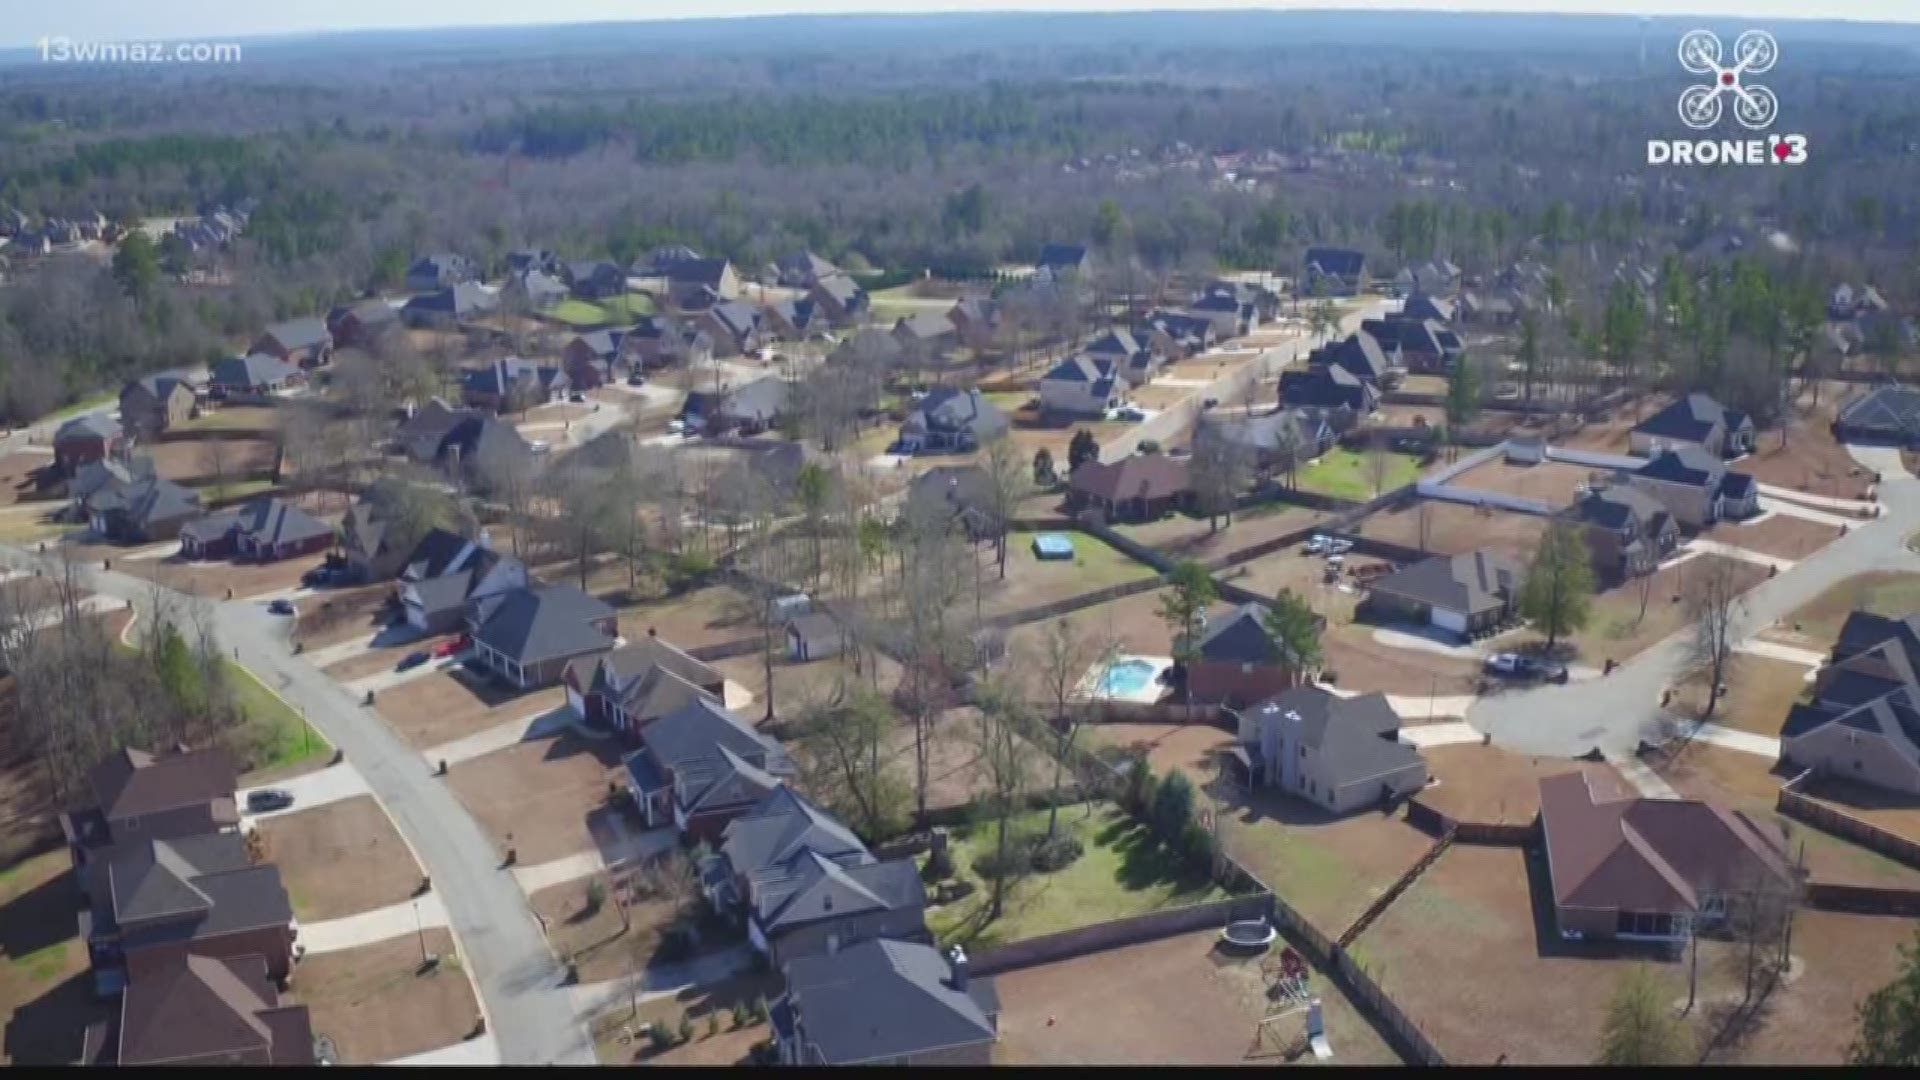 Census data shows Houston County's population grew 40% in the last two decades. Here's what that looks like from a bird's eye view.